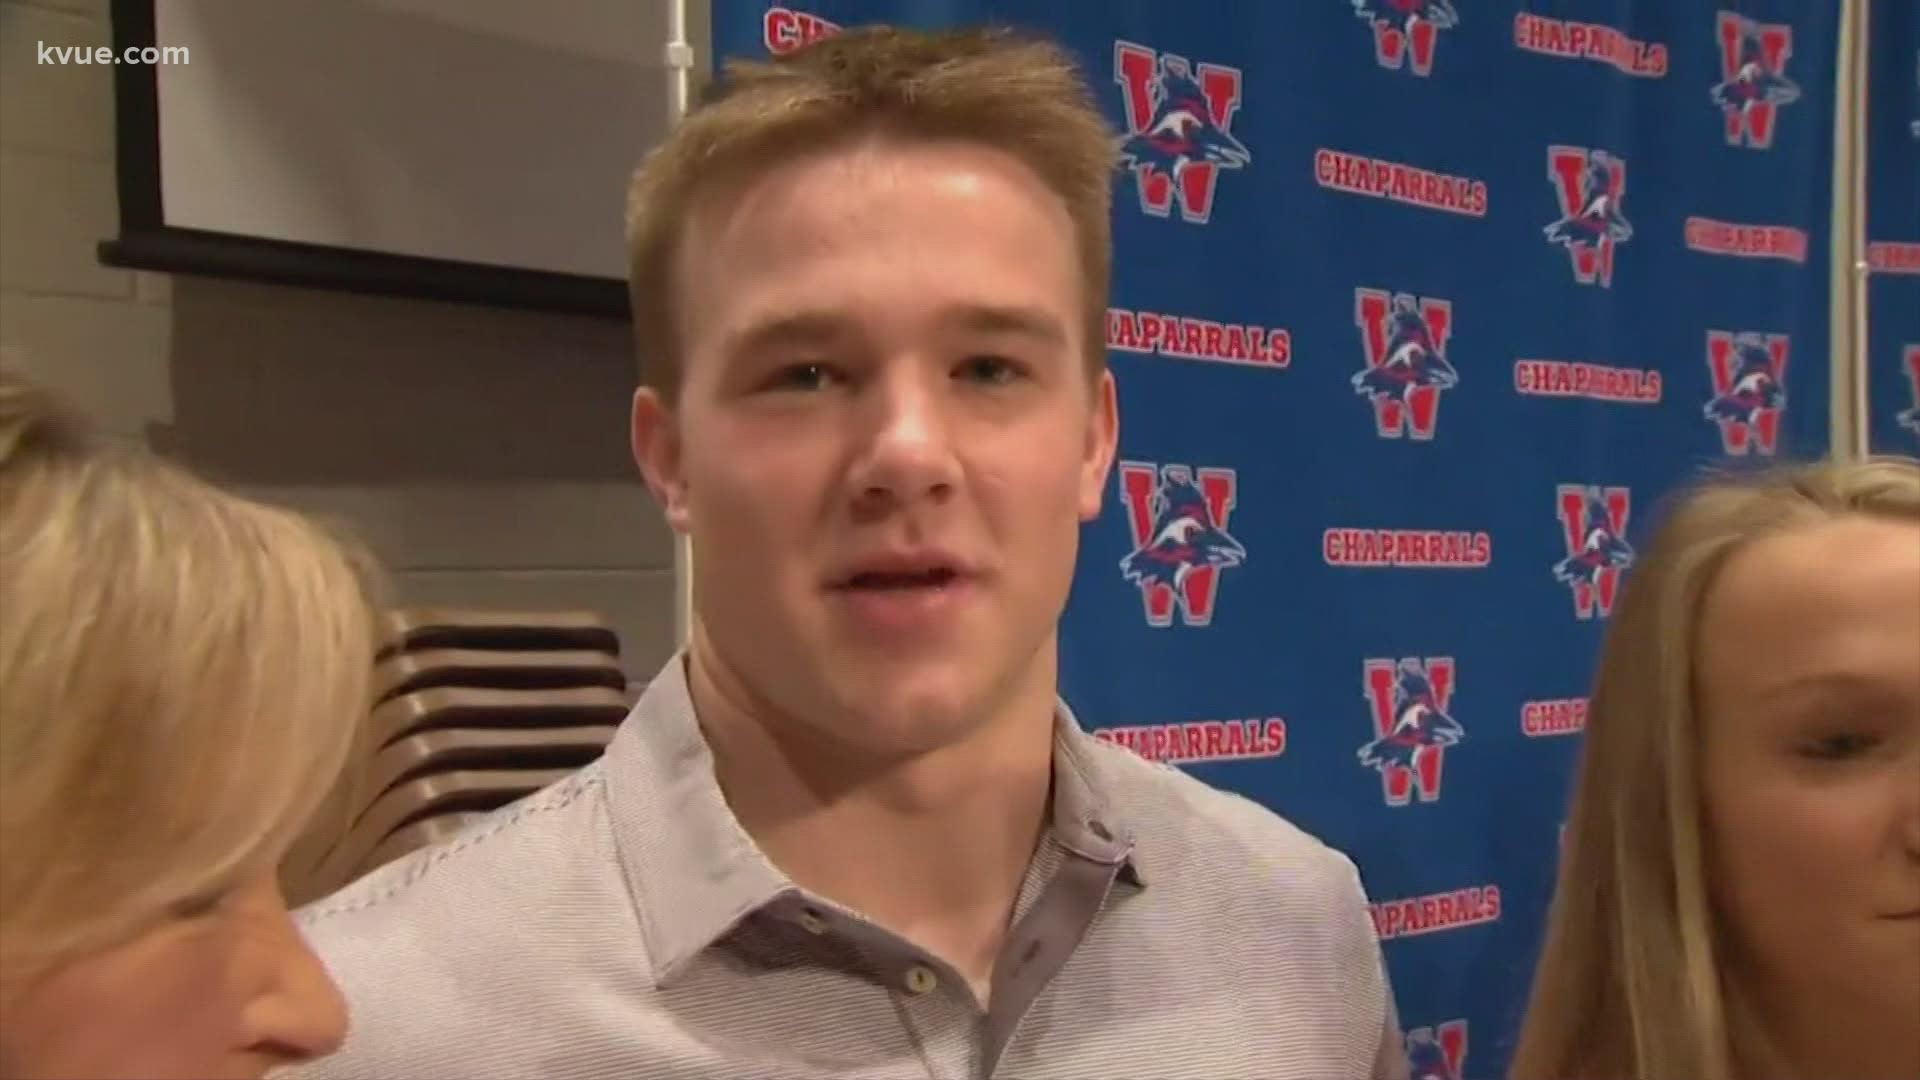 Jake Ehlinger was a star player from Westlake High School. His alma mater has a powerhouse football legacy, winning a state championship this past season.